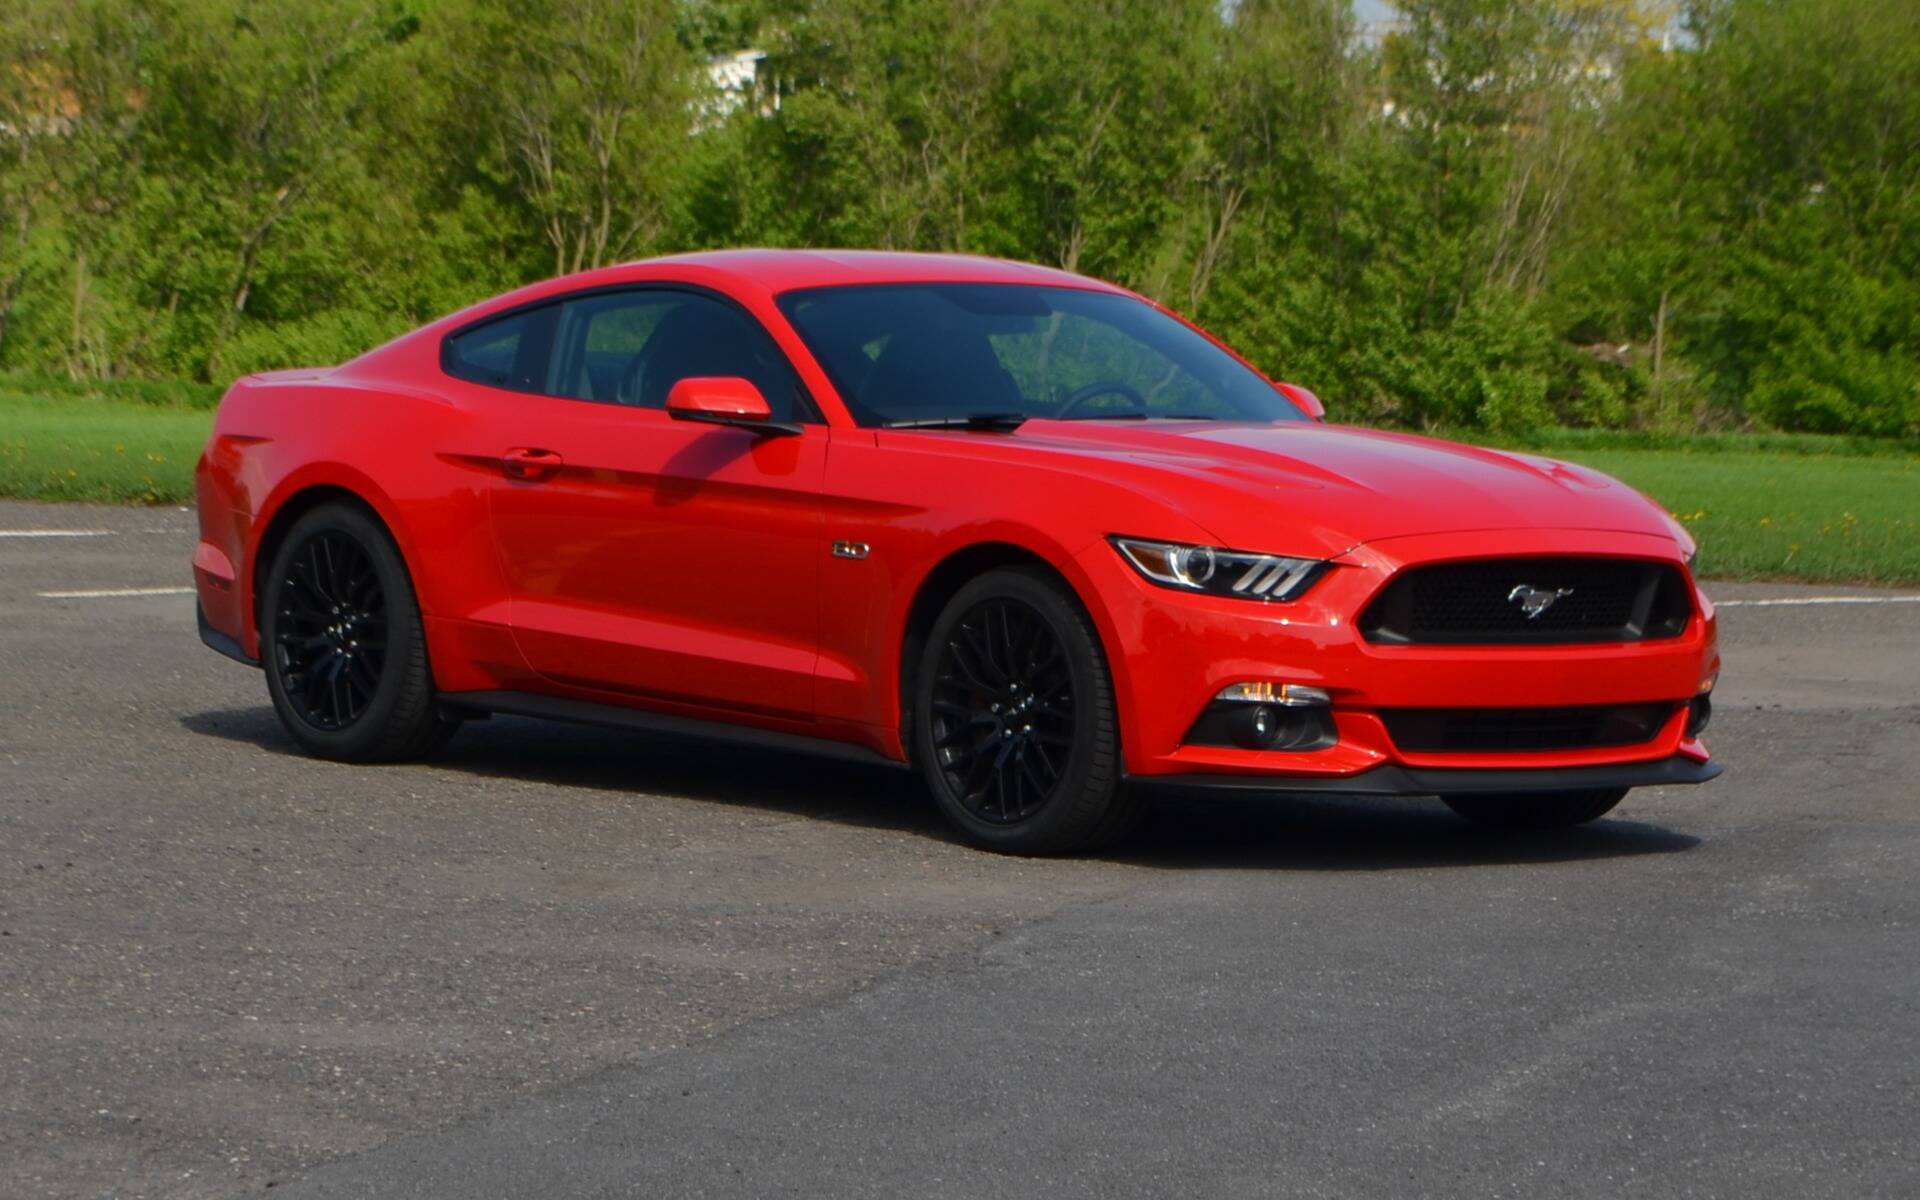 Ford rappelle 23 000 Mustang au Canada